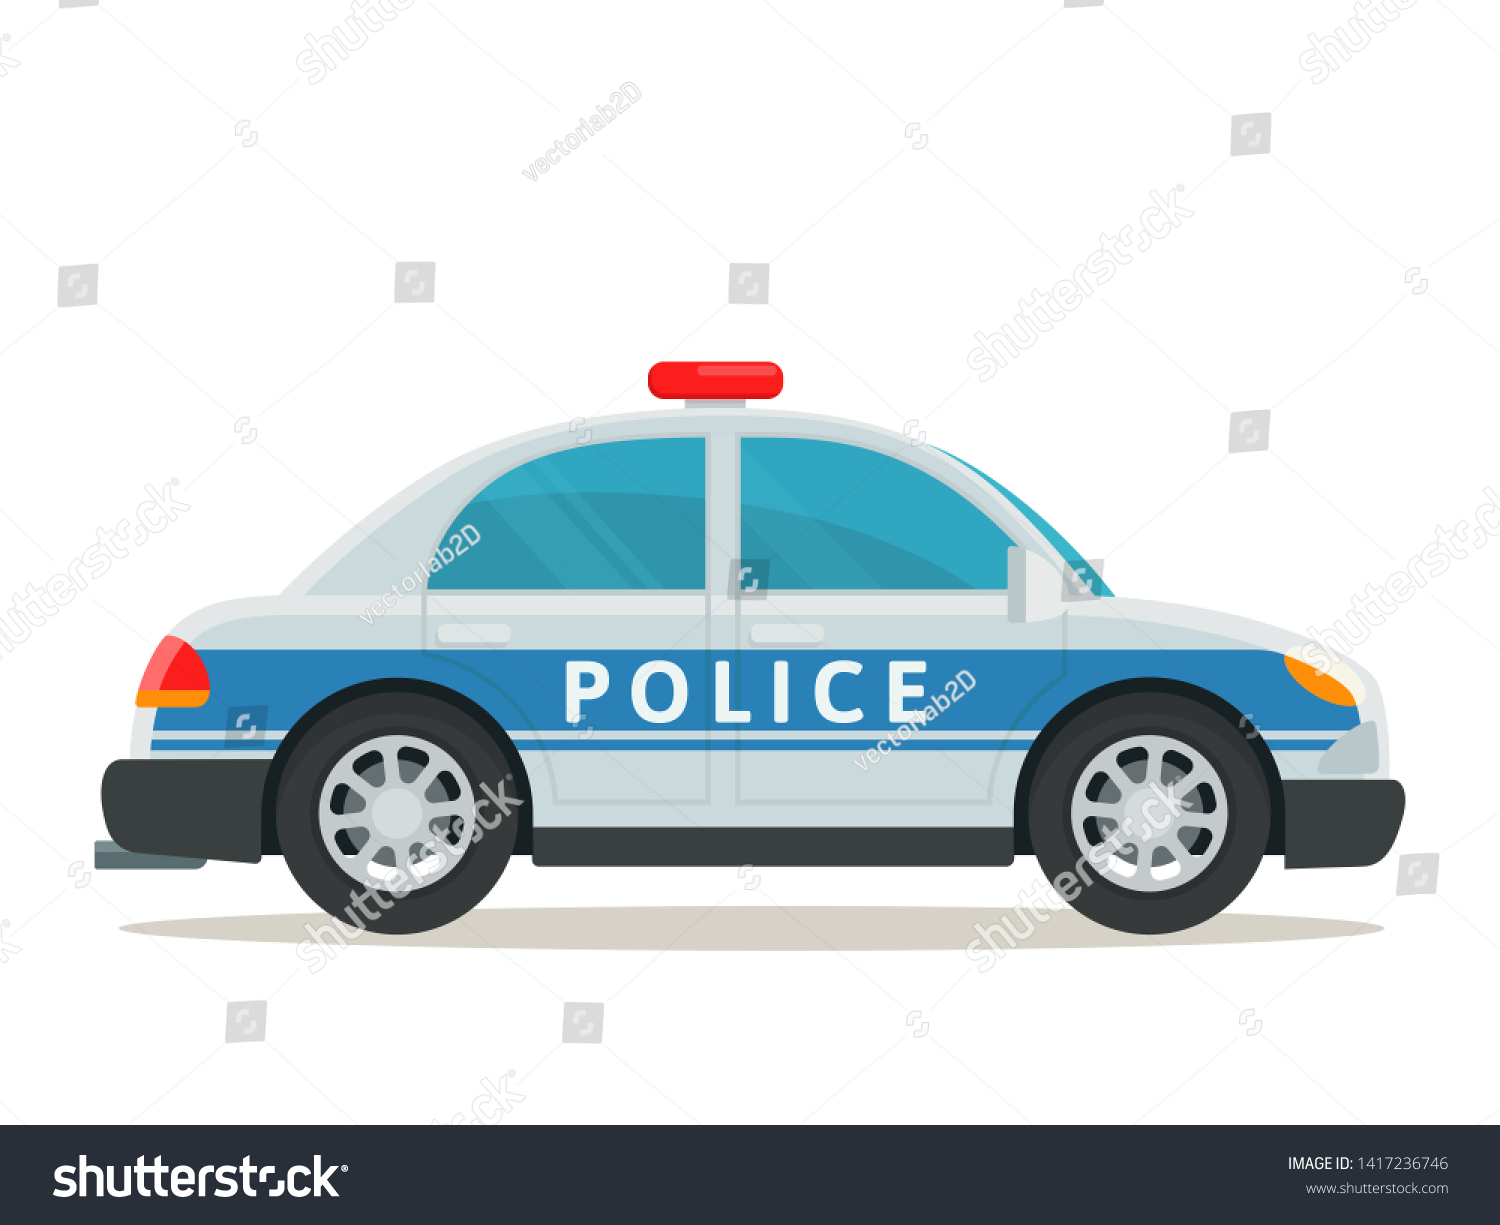 SVG of Police car, side view. Police patrol transport. Vector illustration, flat cartoon style. Isolated on white background. svg